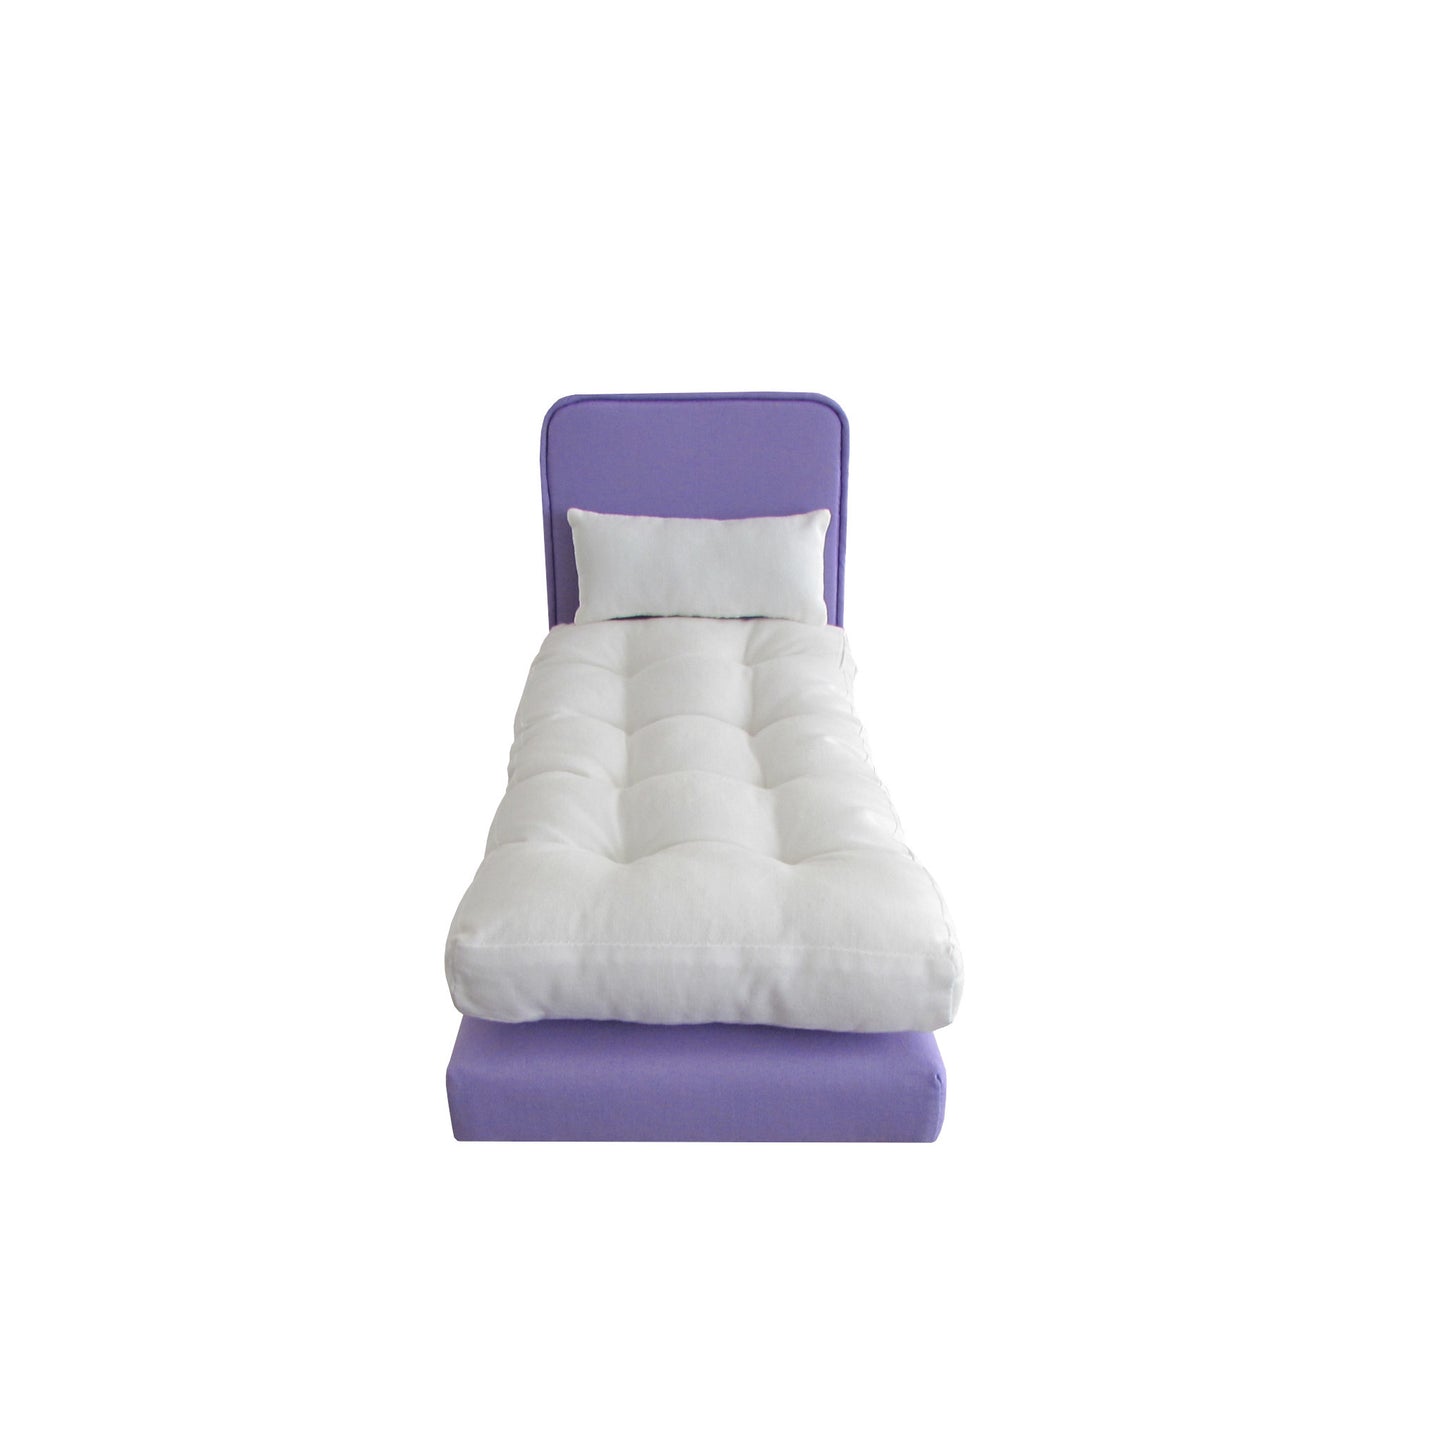 Upholstered Lavender Doll Bed for 11 1/2-inch and 12-inch dolls Front View